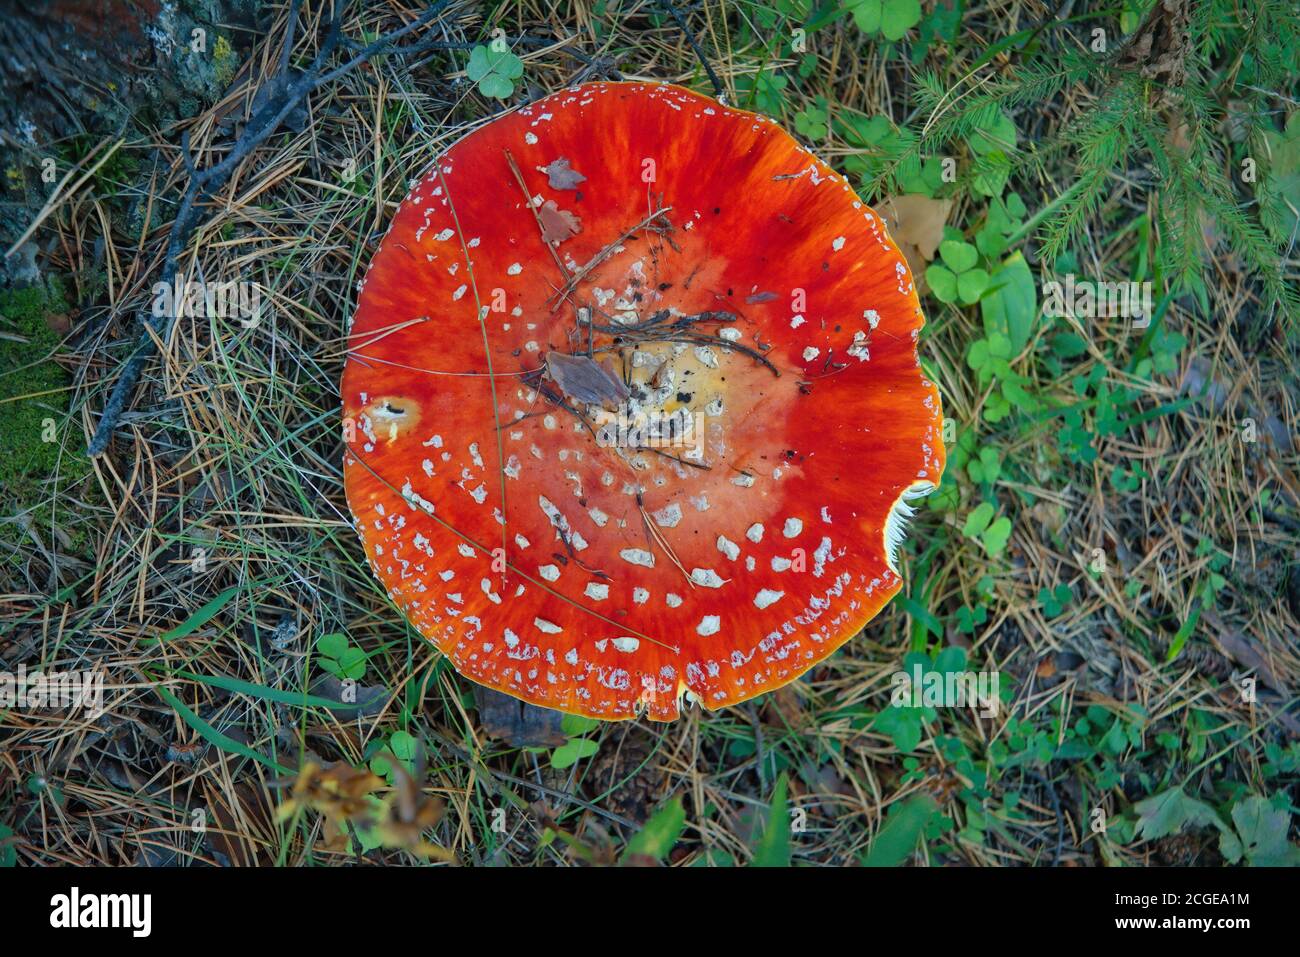 Poisonous Amanita muscaria mushrooms grow up in a autumn forest. Stock Photo